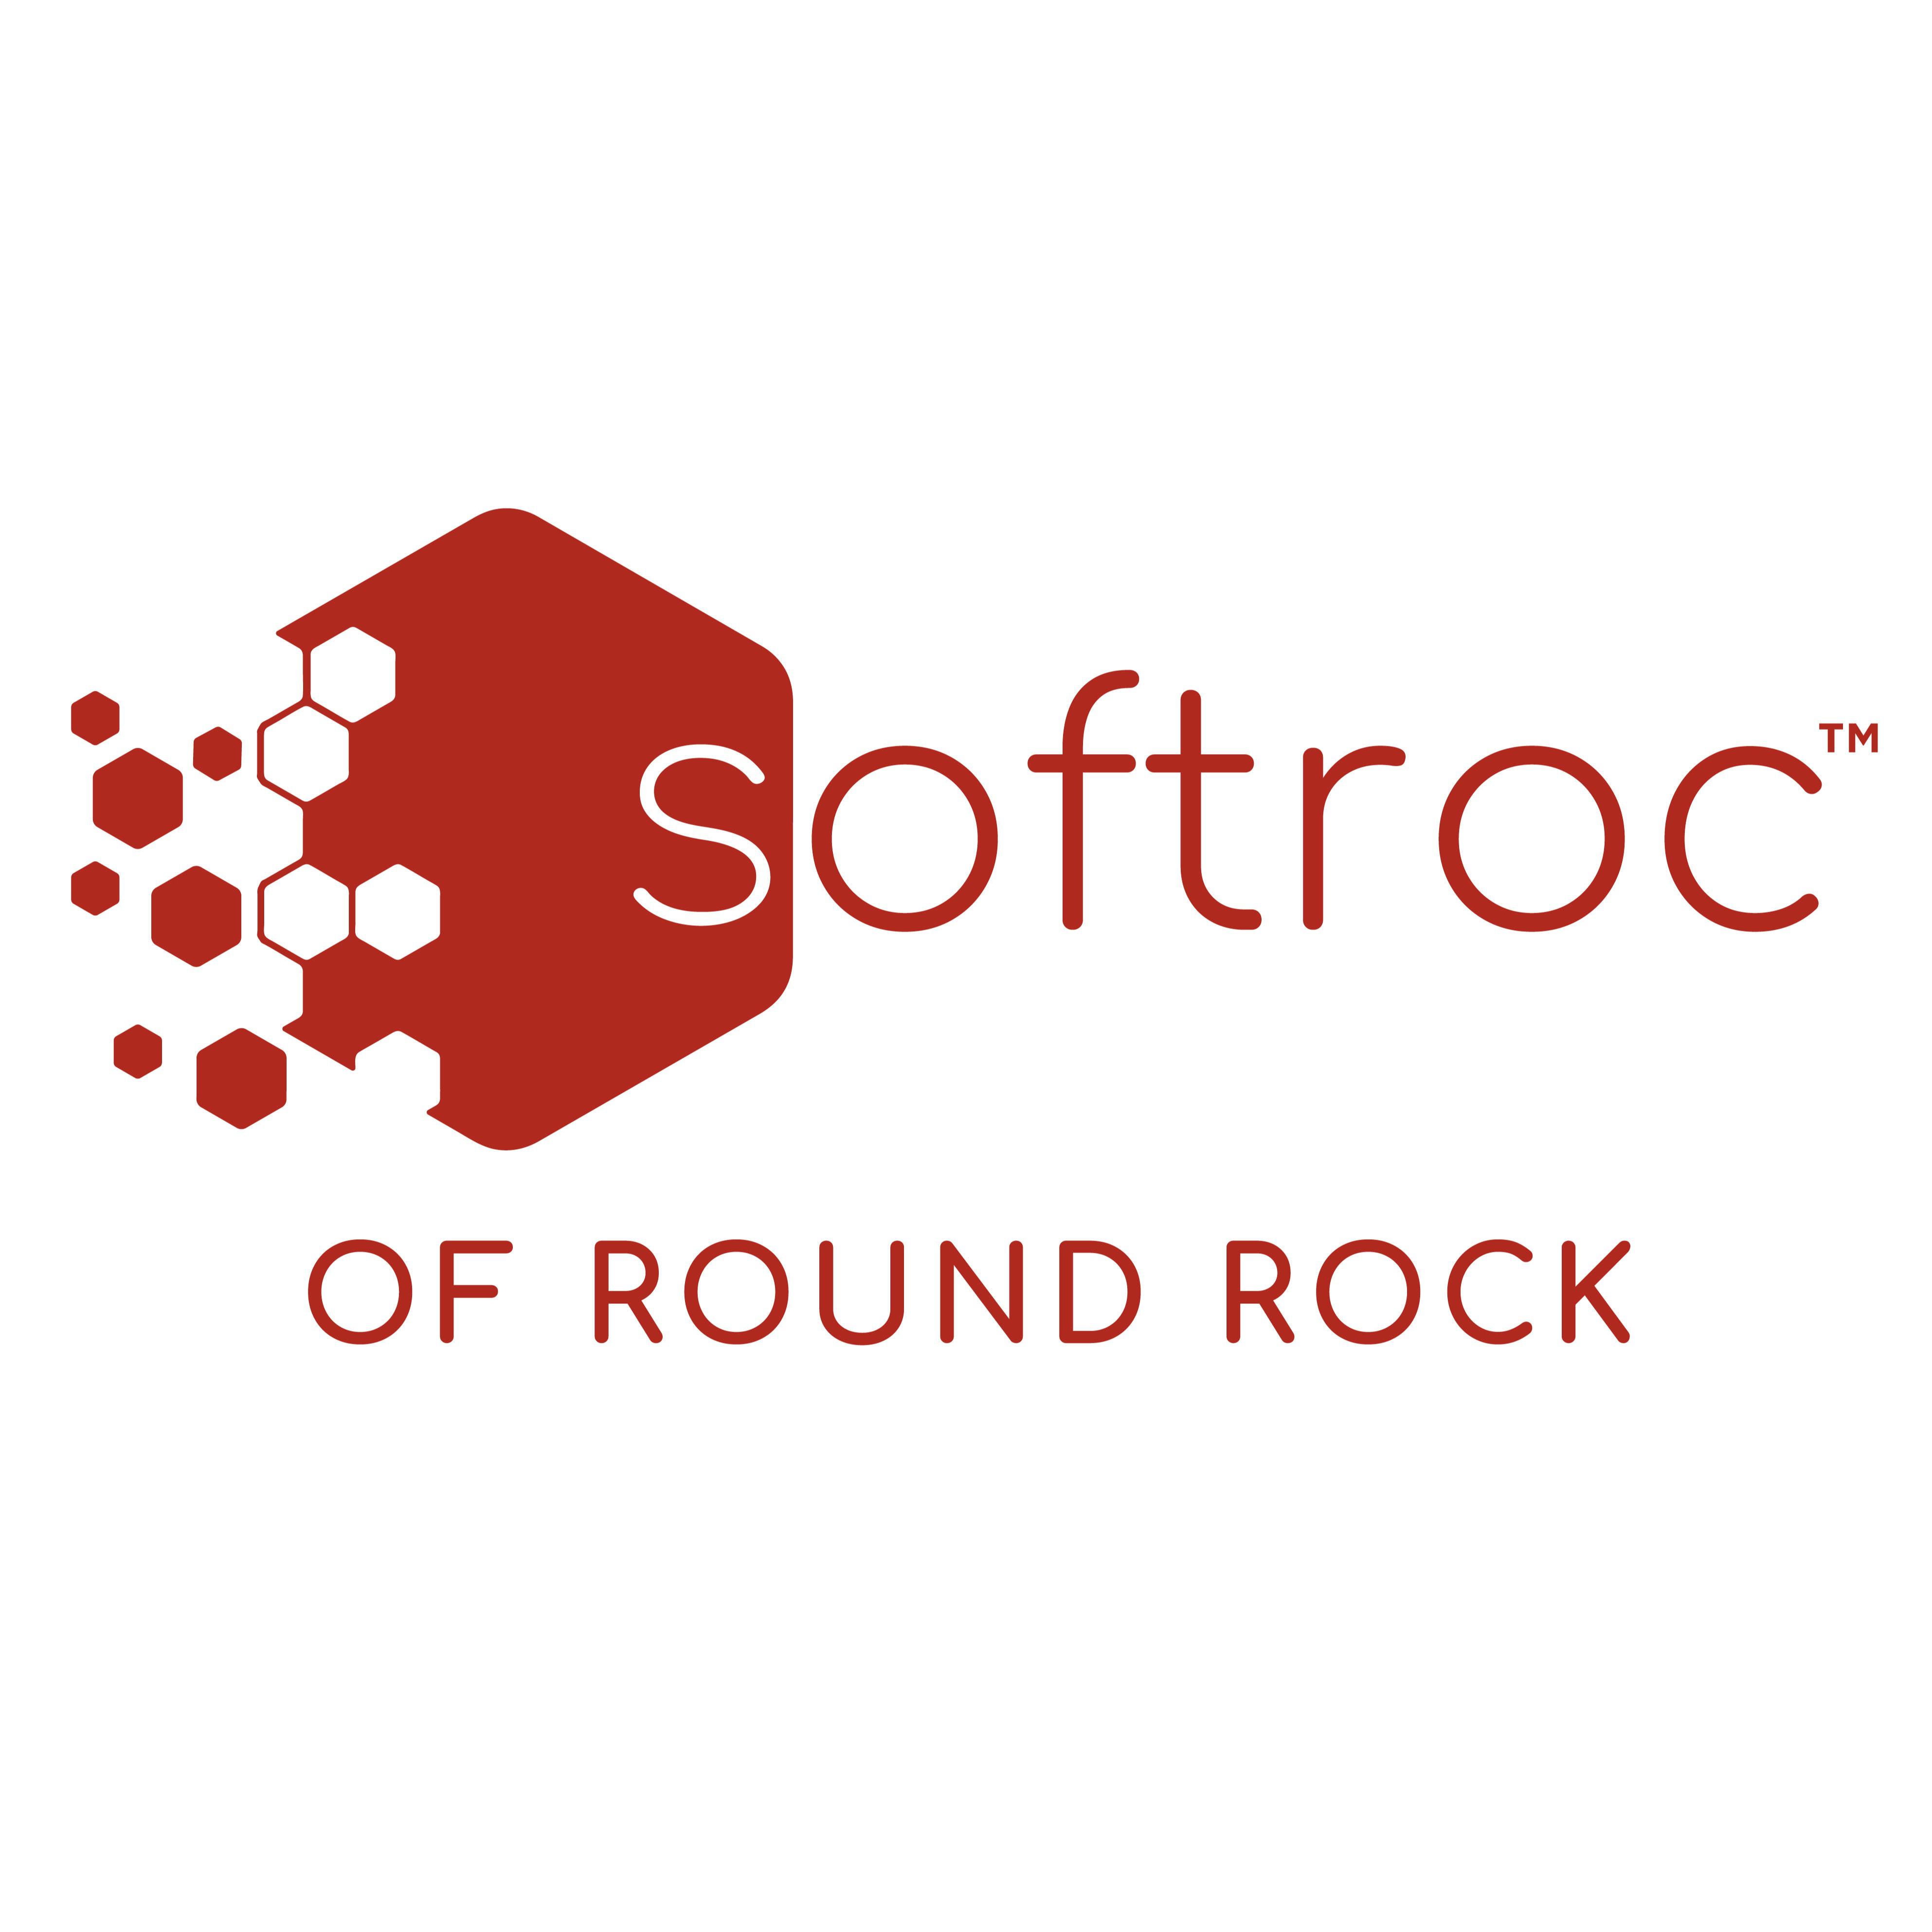 Softroc of Round Rock